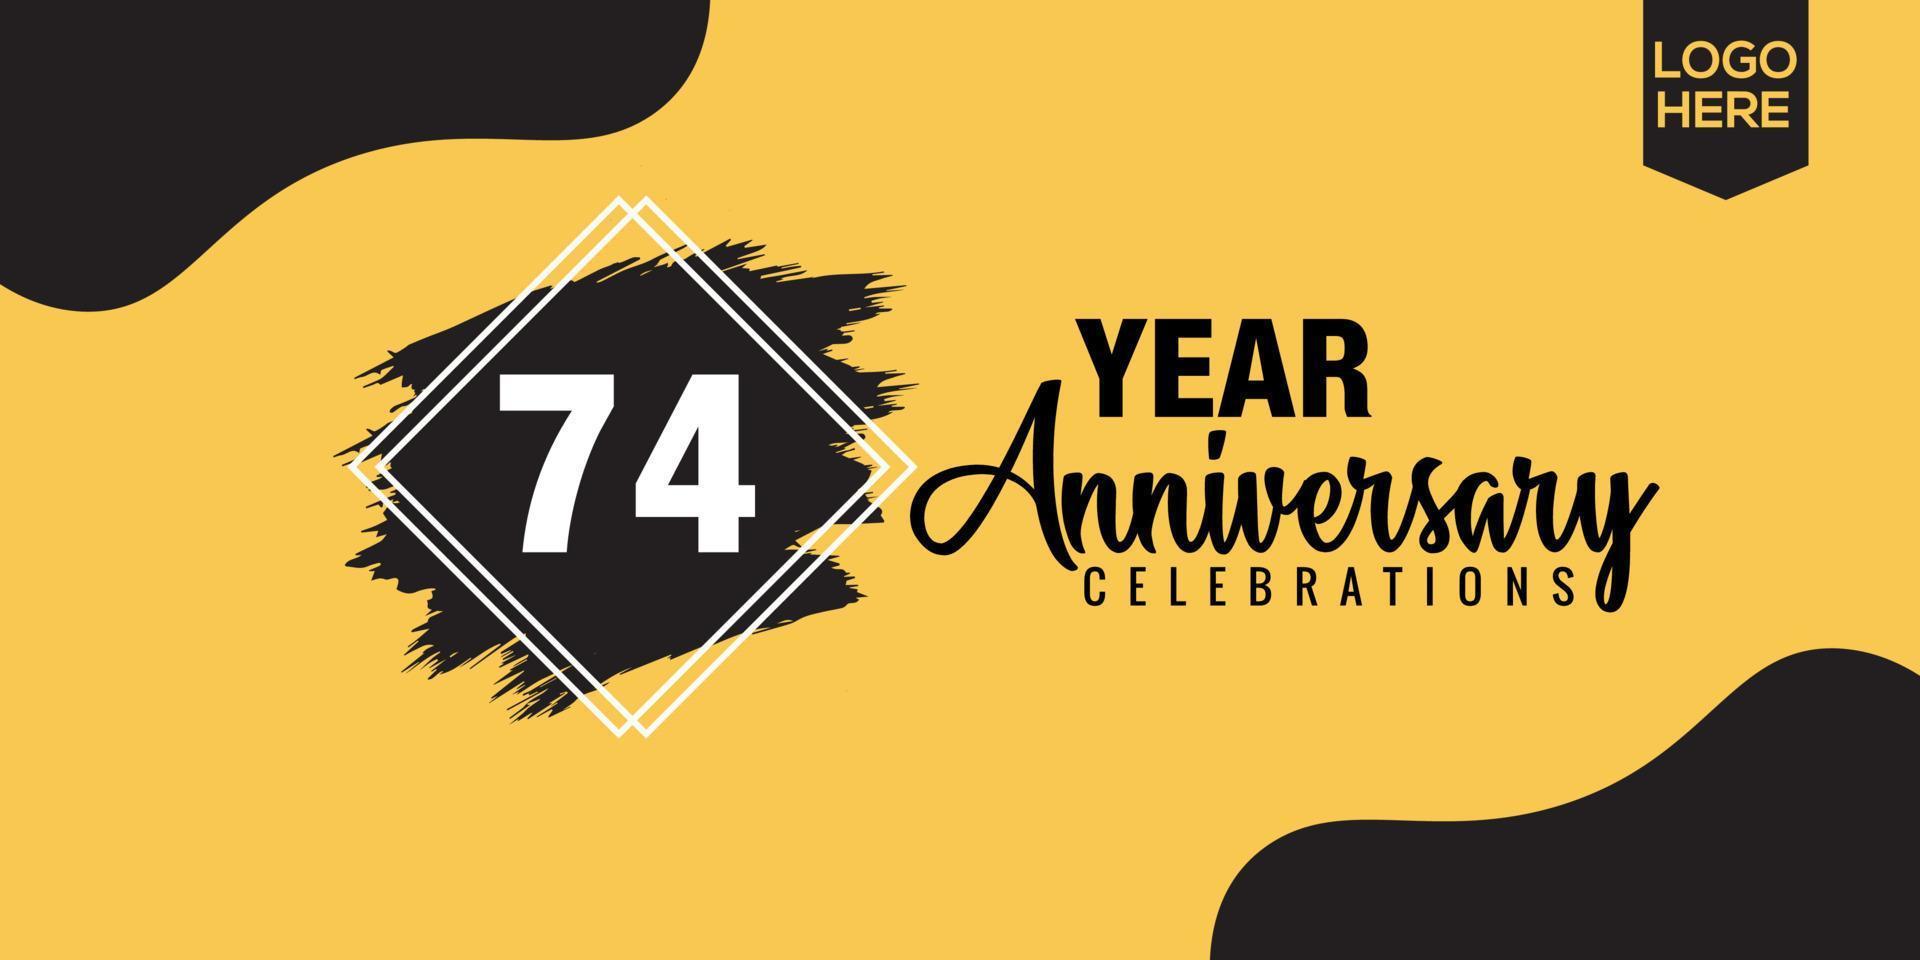 74th years anniversary celebration logo design with black brush and yellow color with black abstract vector illustration